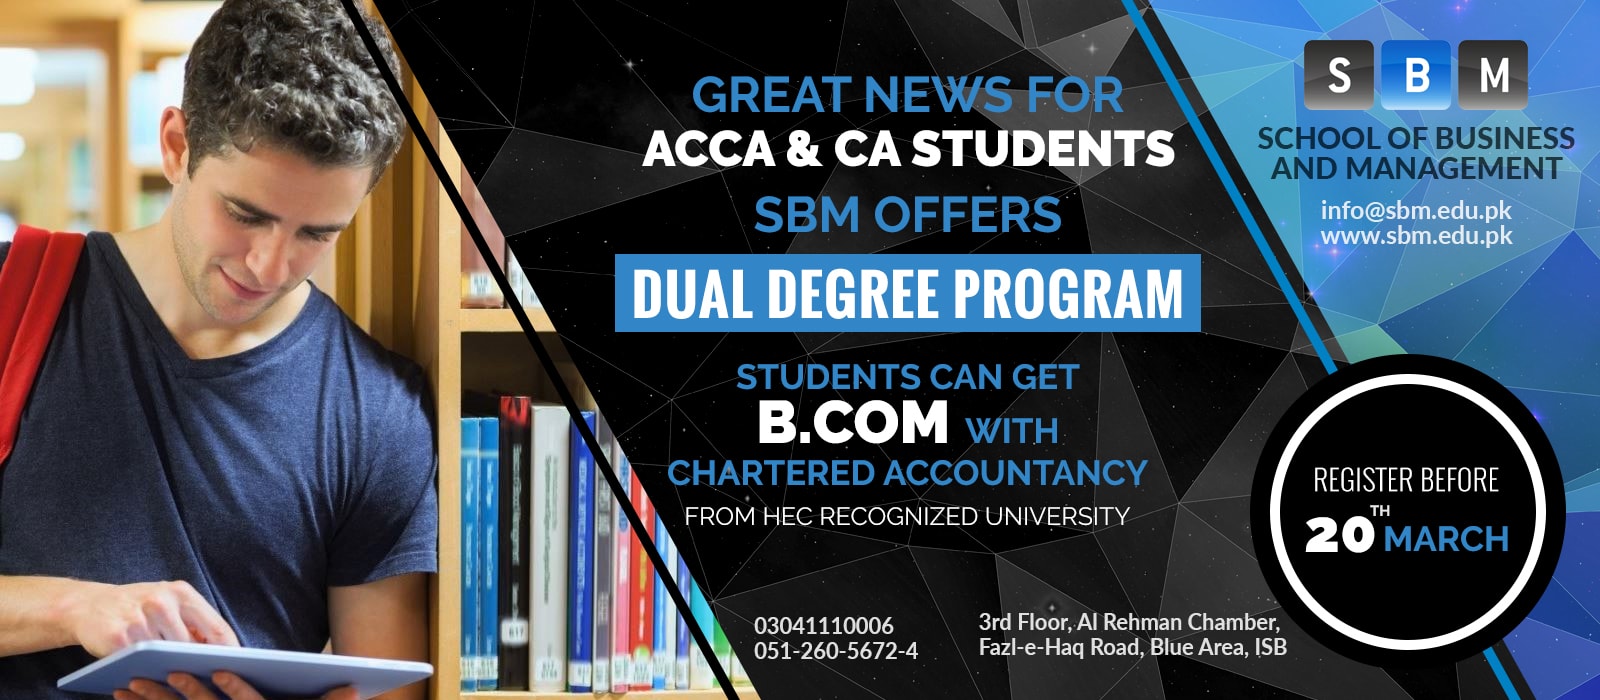 Get B.COM degree along with your Chartered Accountancy